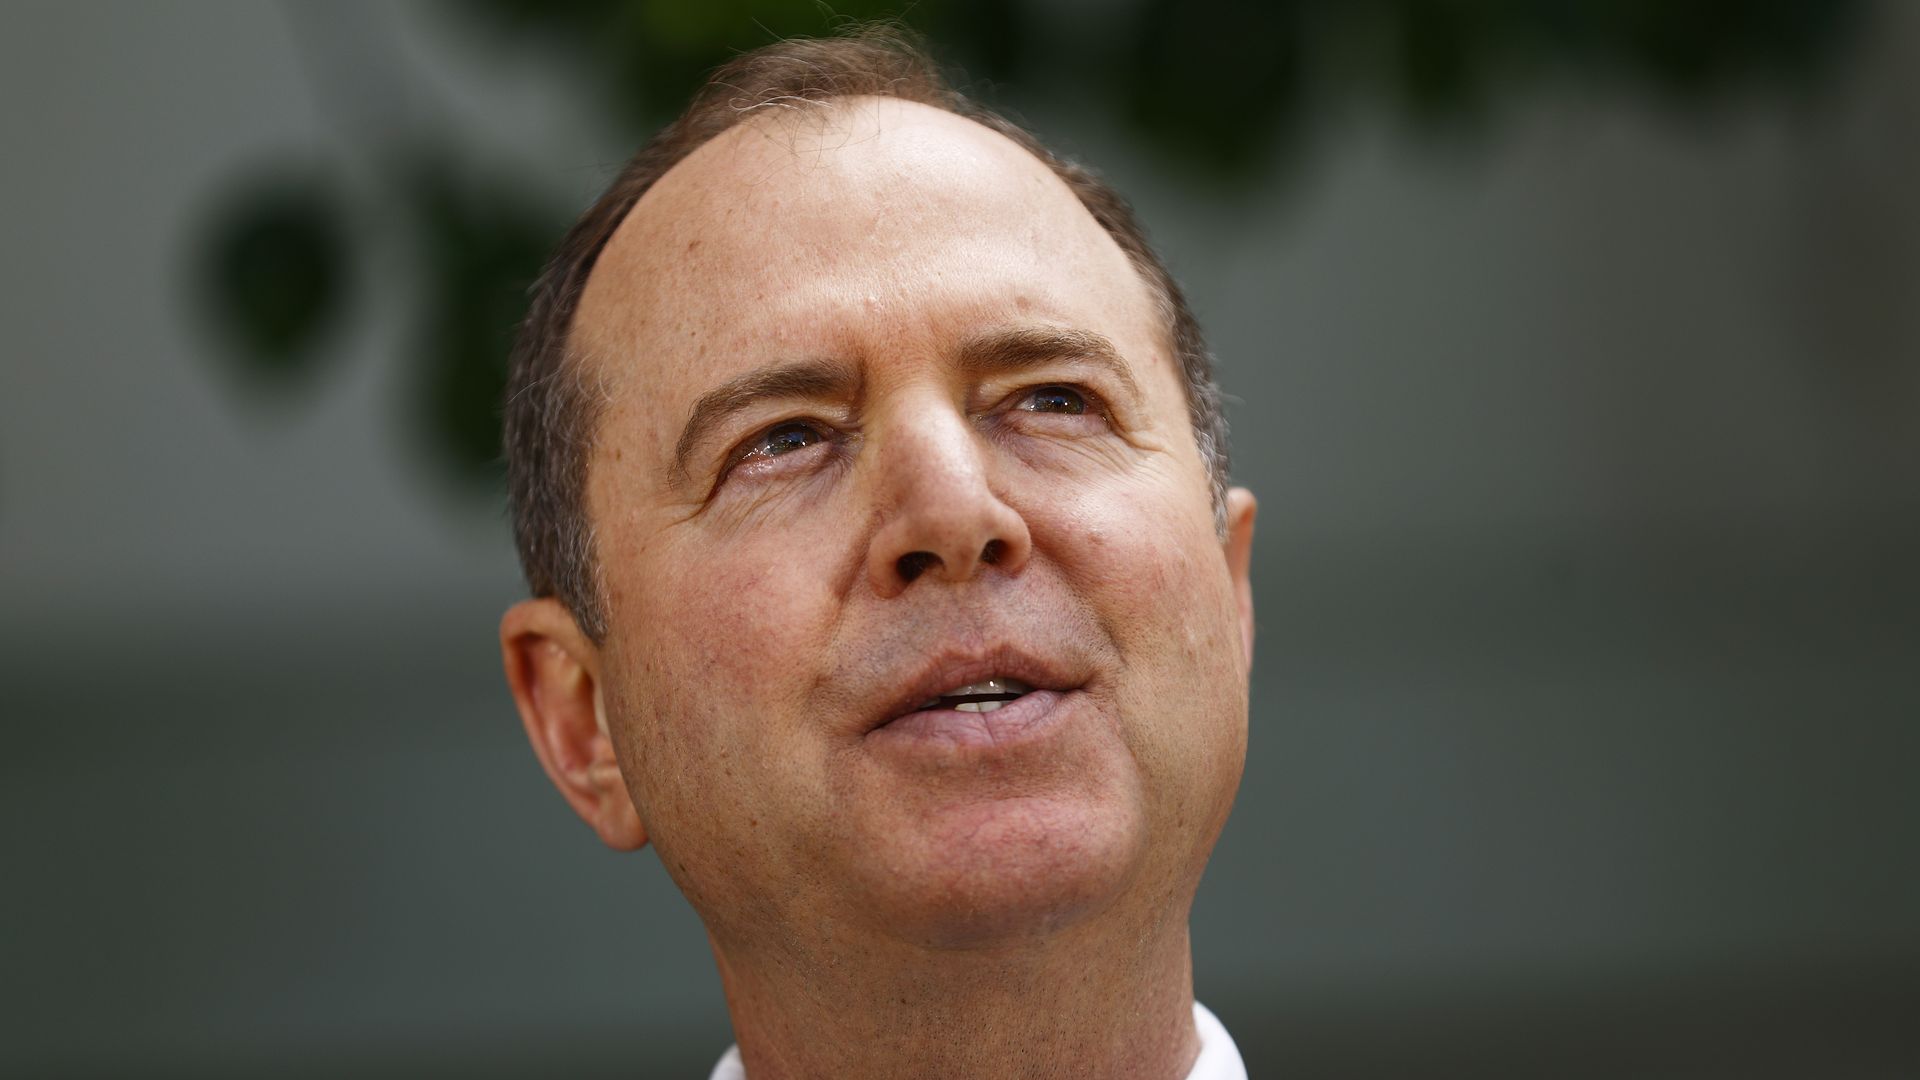 In this image, Adam Schiff stands and speaks while looking to the right.